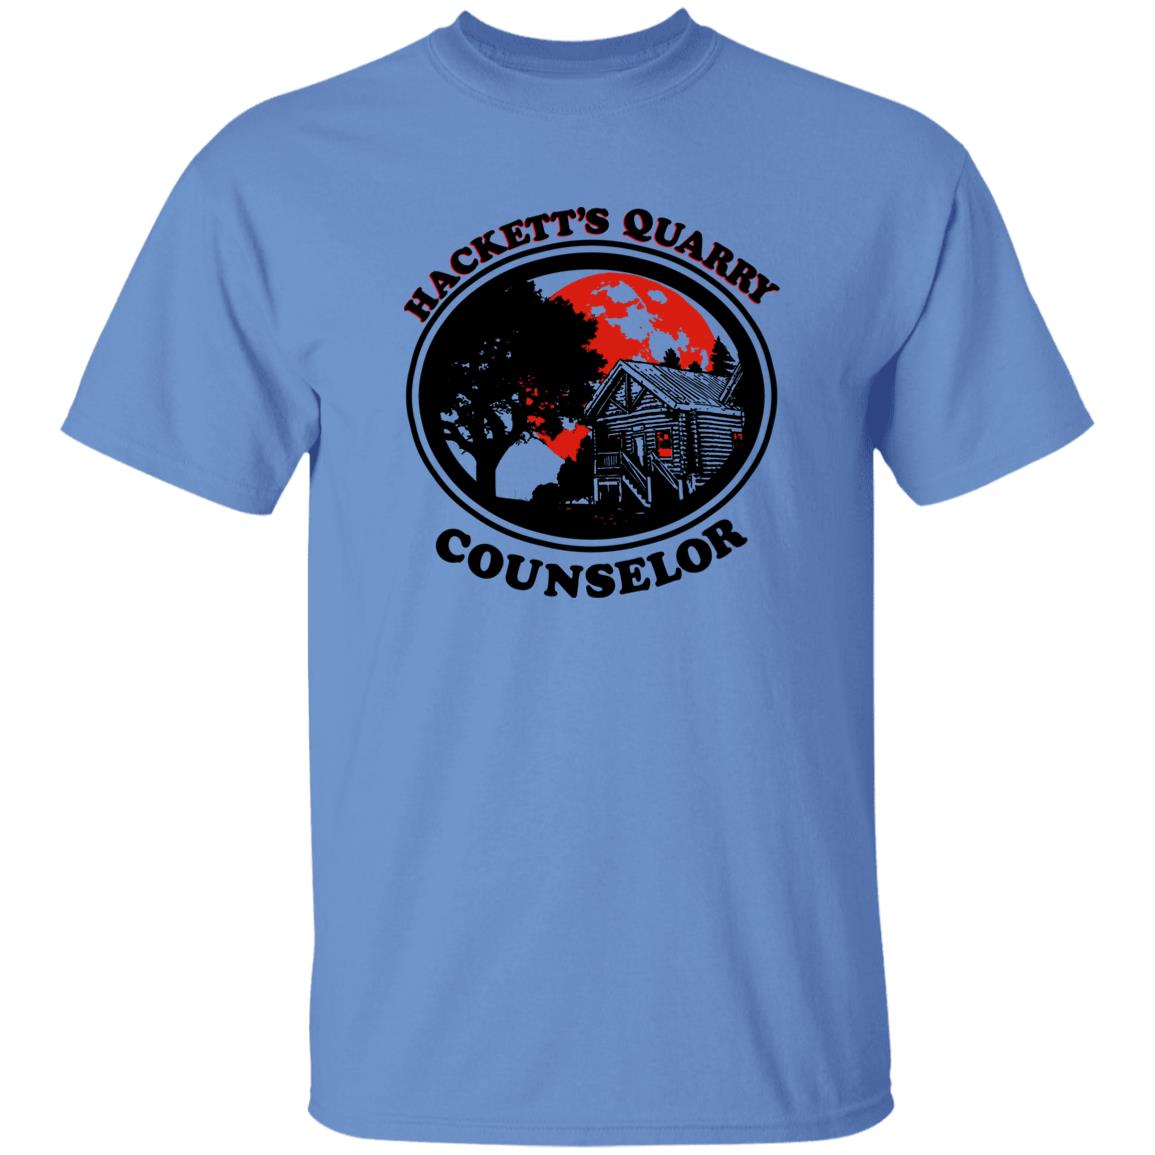 Hackett’s Quarry Counselor Shirt 2K Is Playing #Thequarry Zach Tinker